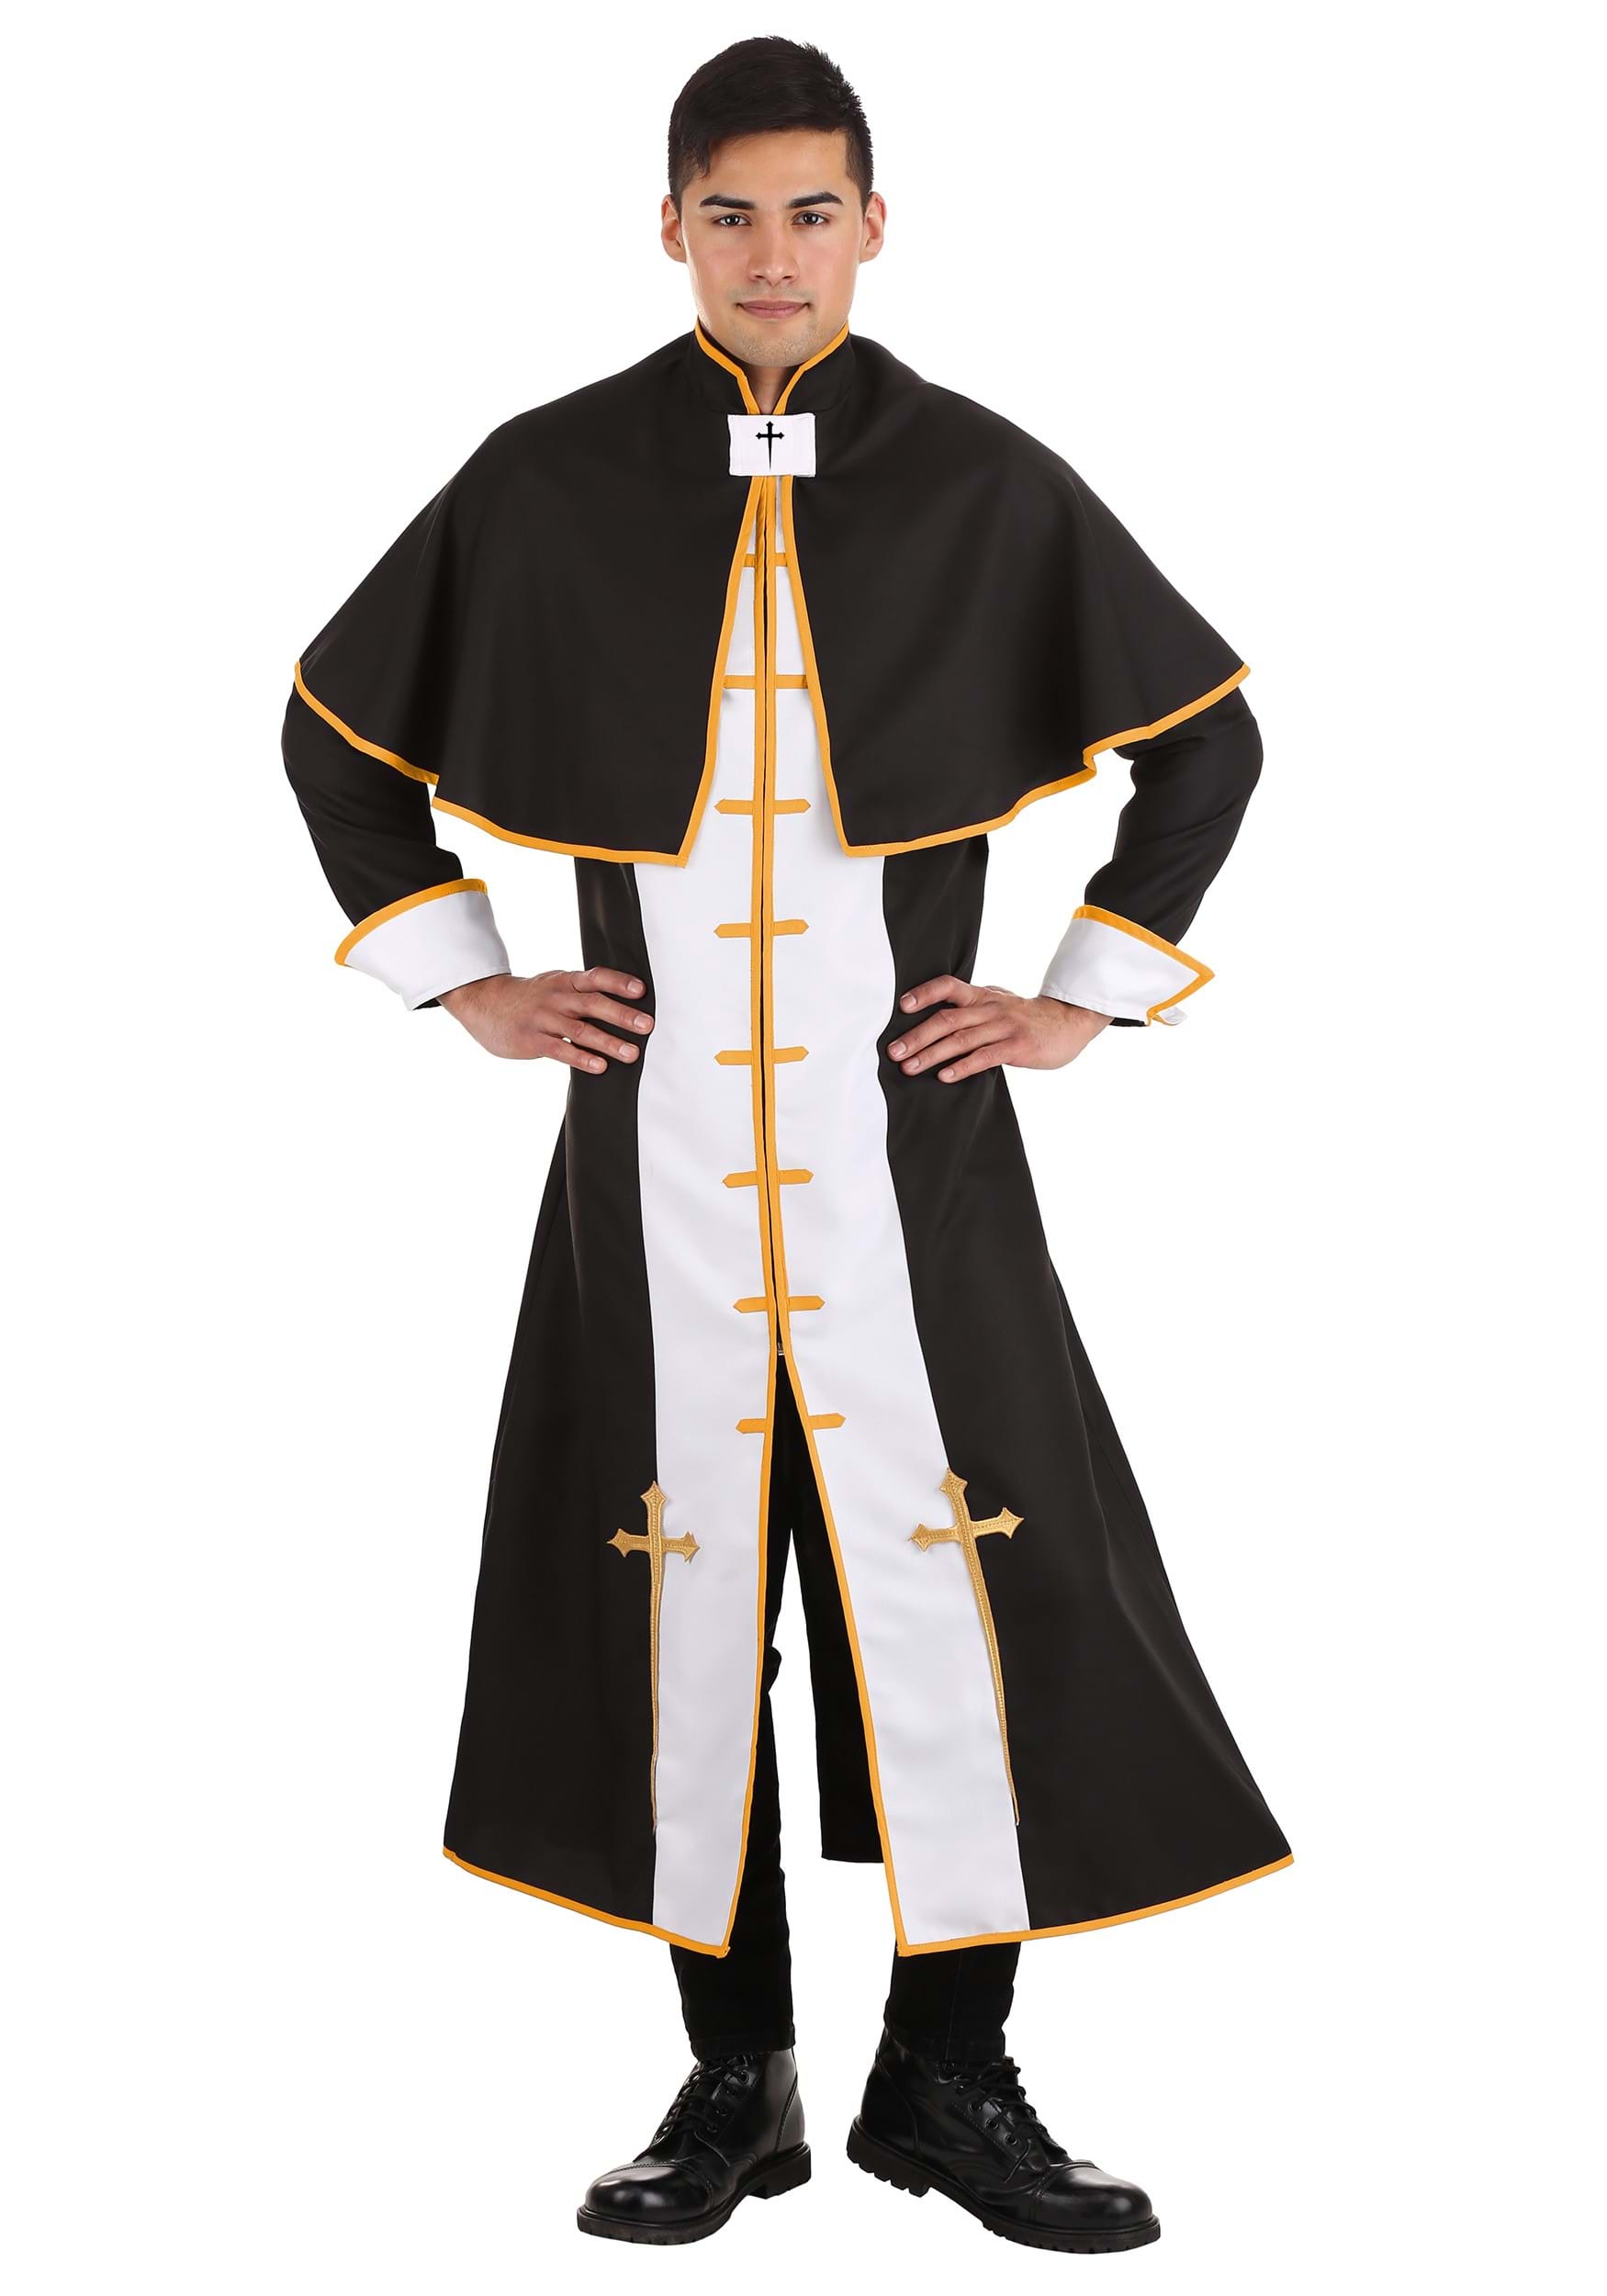 Photos - Fancy Dress FUN Costumes Adult Holy Priest Costume | Religious Costumes Black/Brow